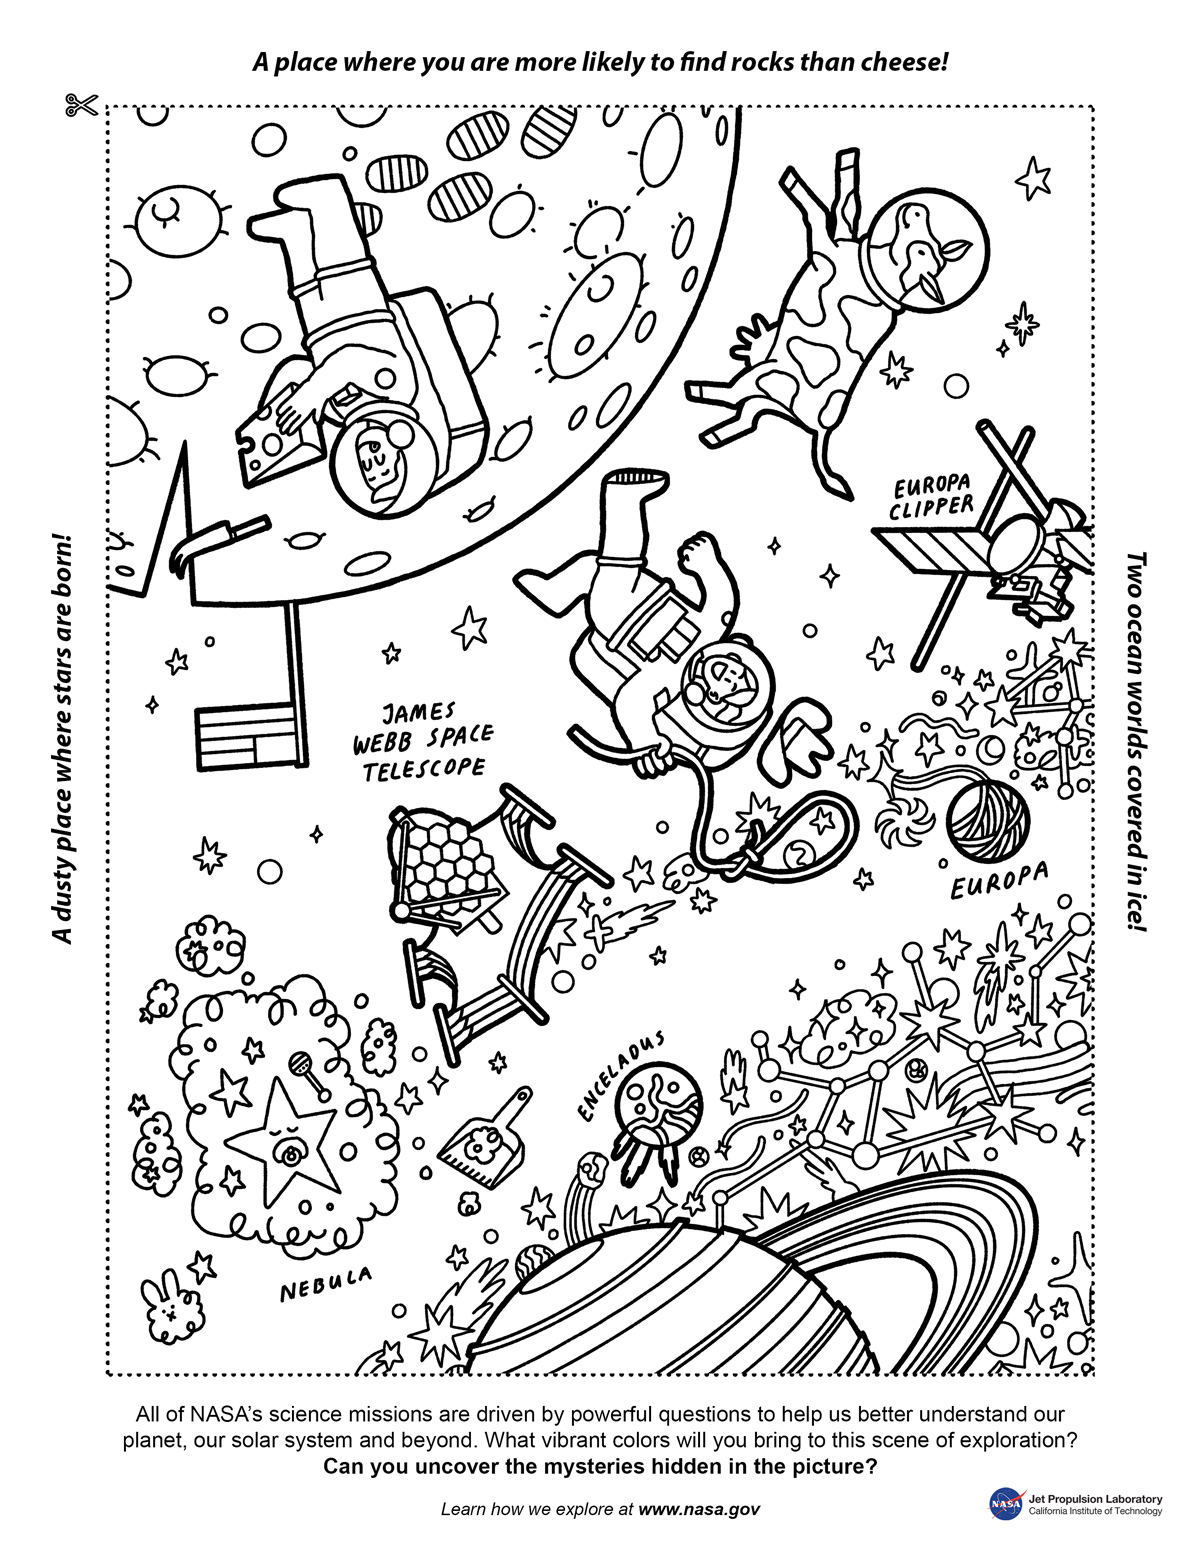 coloring page featuring astronauts and a cow in space, James Webb Space Telescope, Europa and the Europa Clipper mission, and a nebula